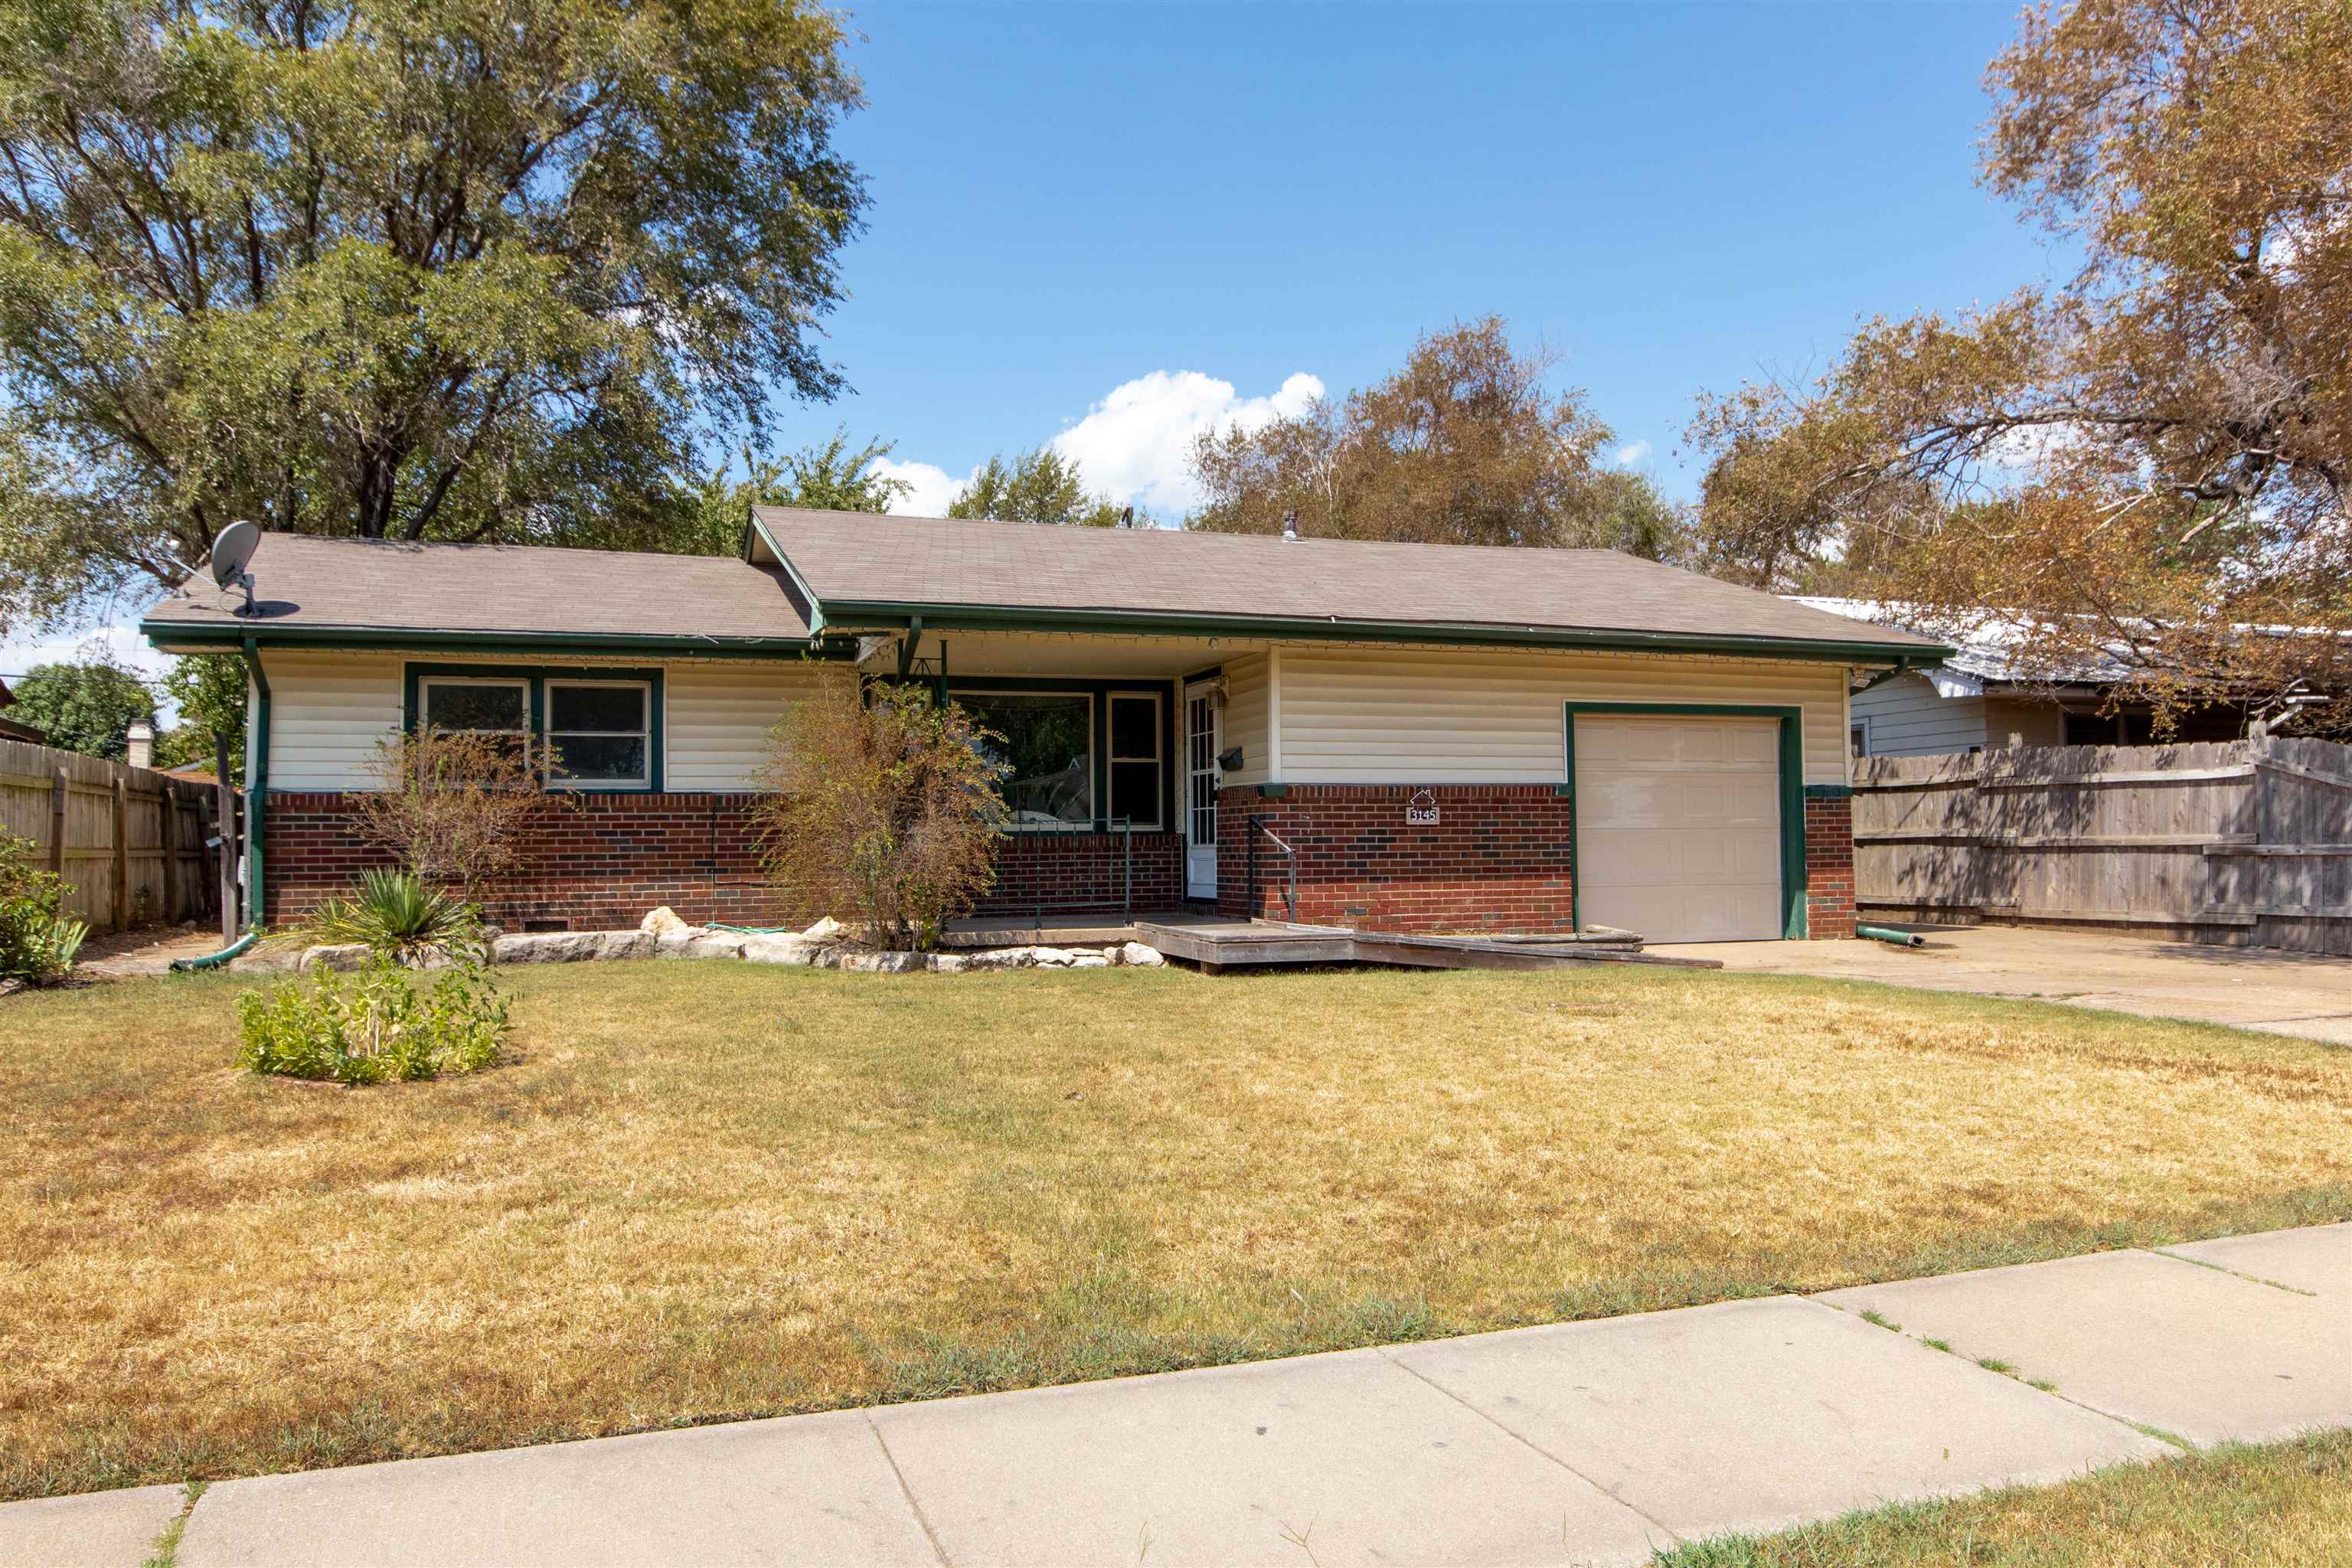 Don’t miss your chance to see this remodeled 3 bedroom, 1 bathroom home in southwest Wichita.  Locat